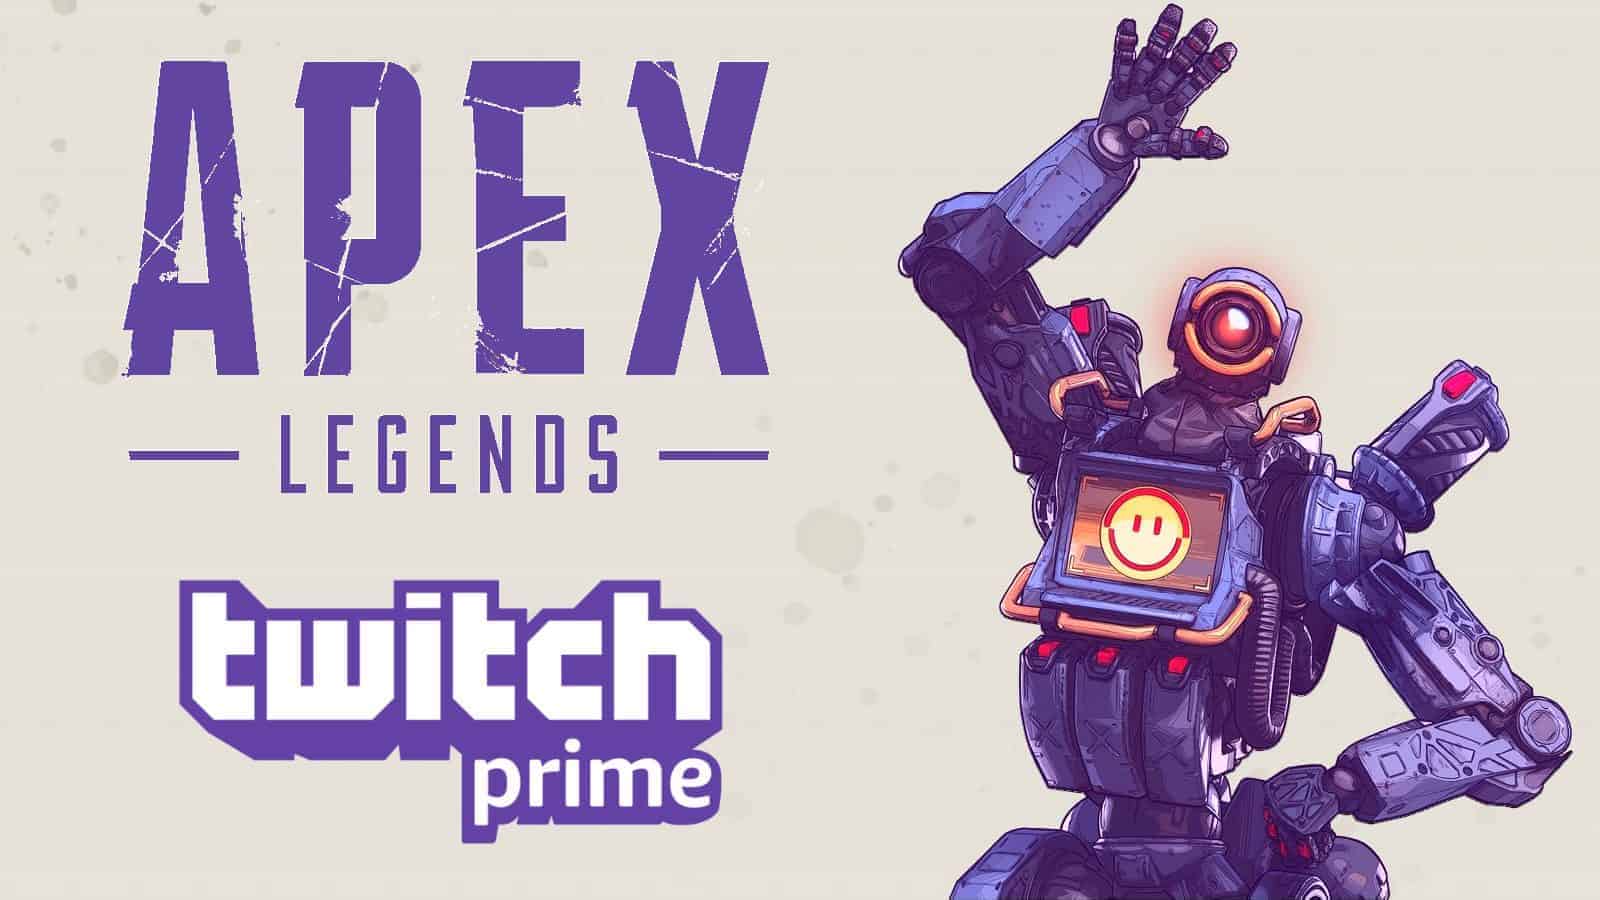 How to use EA login in Apex Legends on Xbox and PS4 to get the Twitch bundle offer